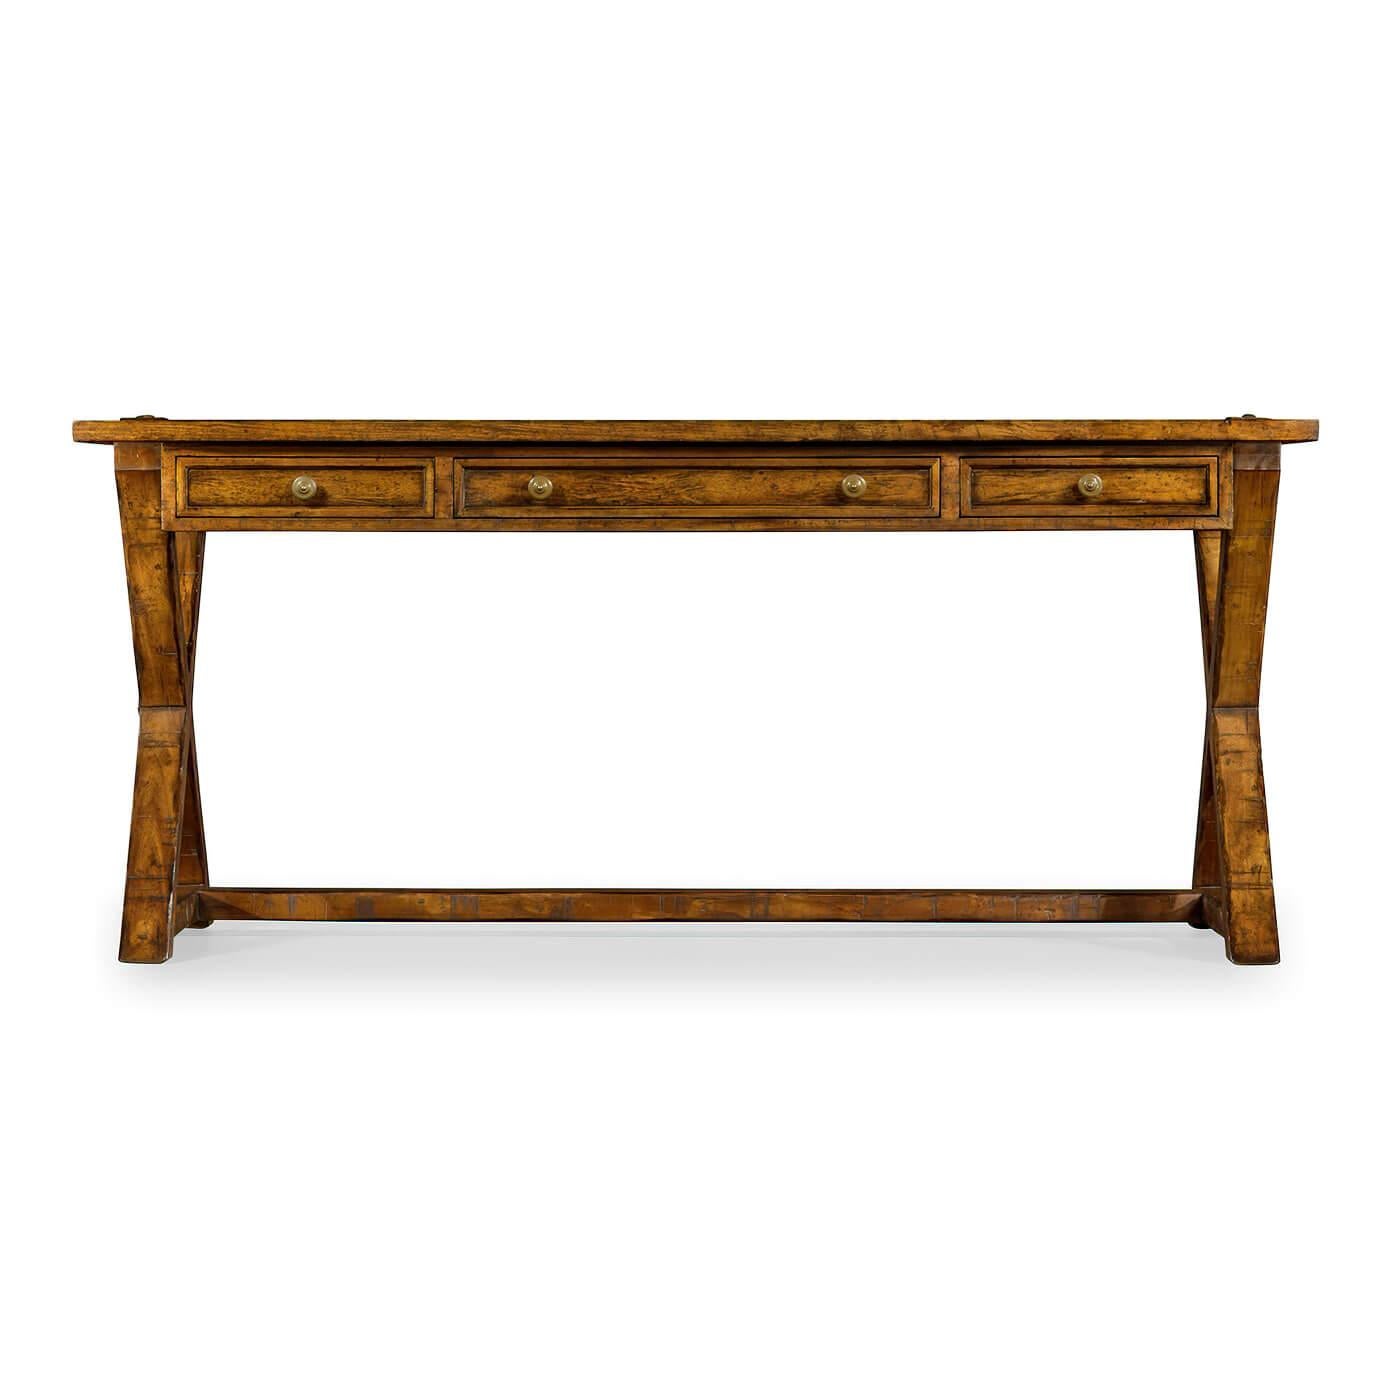 A rustic country-style solid walnut rectangular desk with a rustic finish revealing exposed saw marks. Three small oak-lined drawers to front with mortice and tenon joints to X-frame support and top surface.

Dimensions: 68